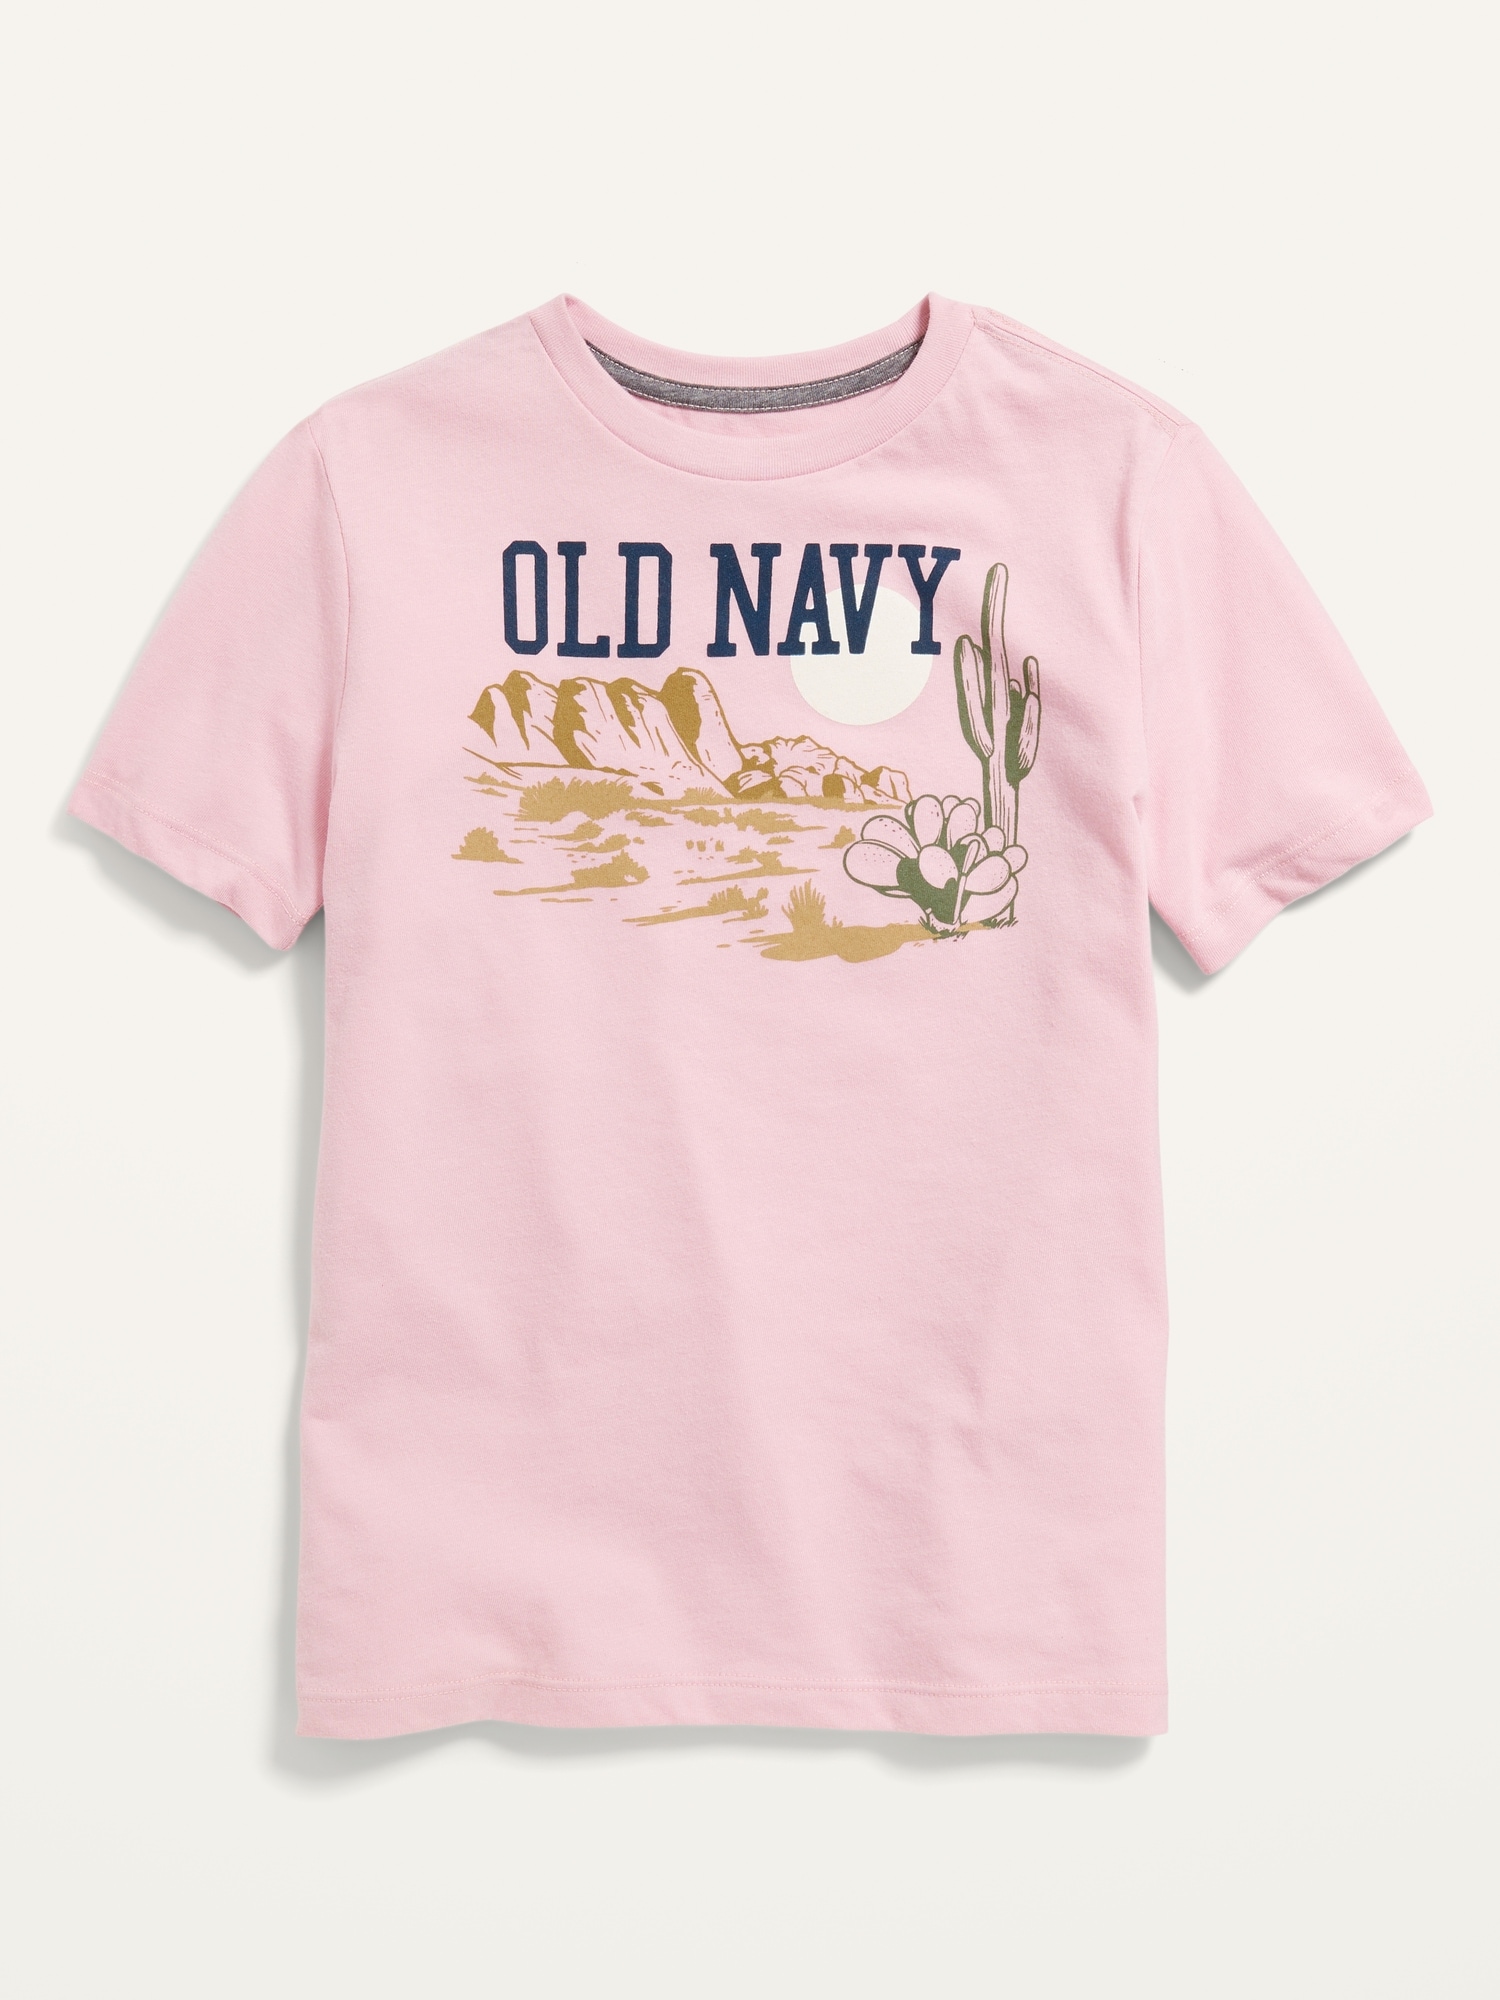 Short-Sleeve Logo-Graphic T-Shirt for Boys | Old Navy